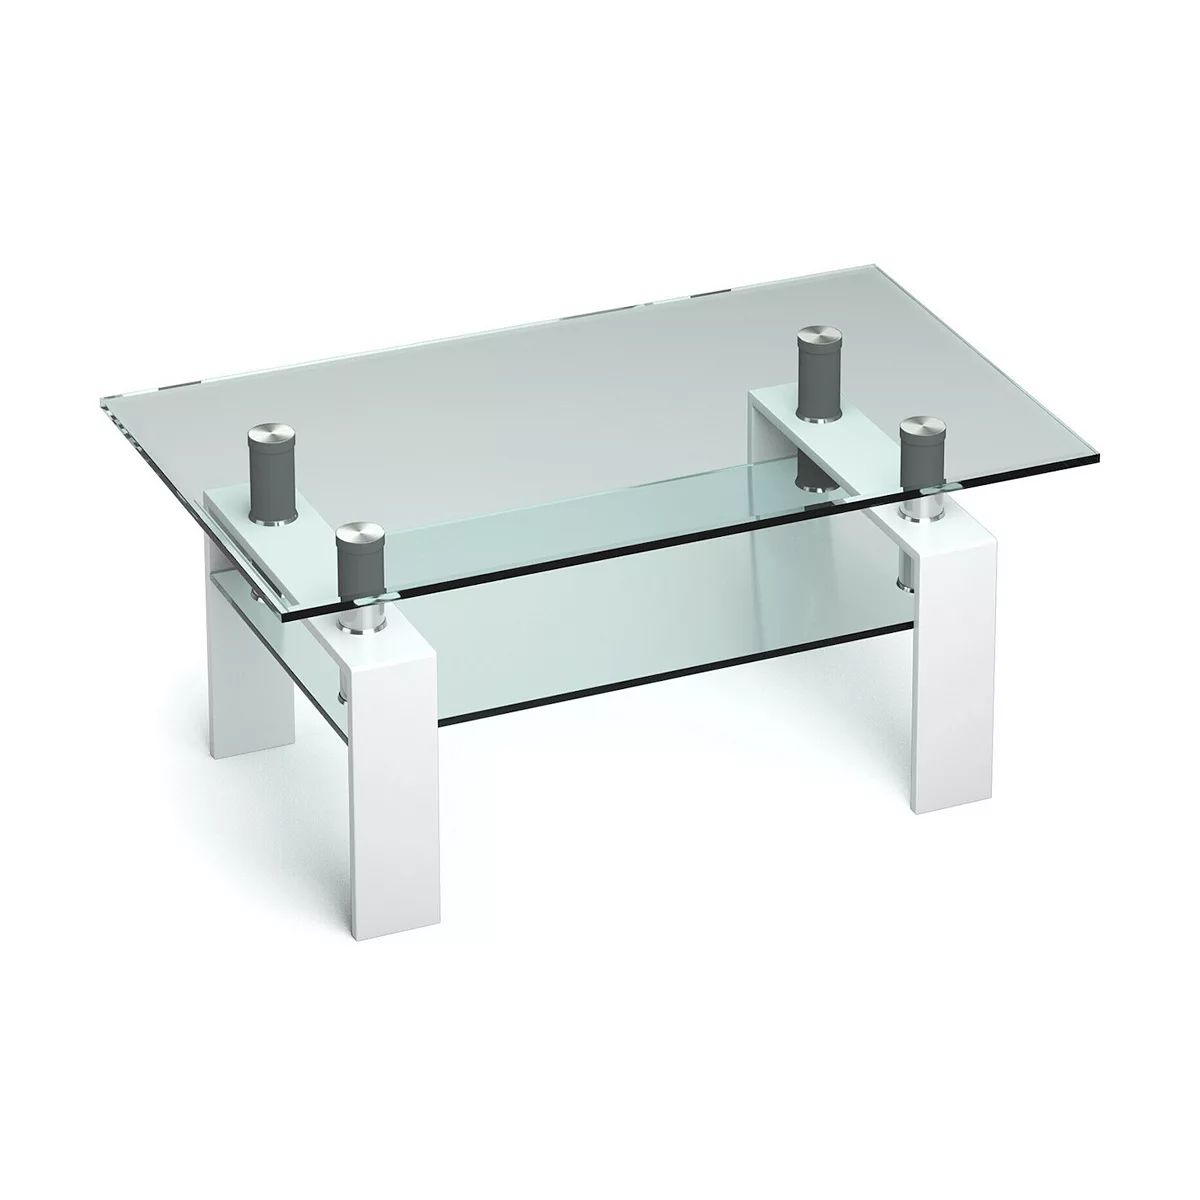 Rectangle Glass Coffee Table With Metal Legs For Living Room-White | Kohl's